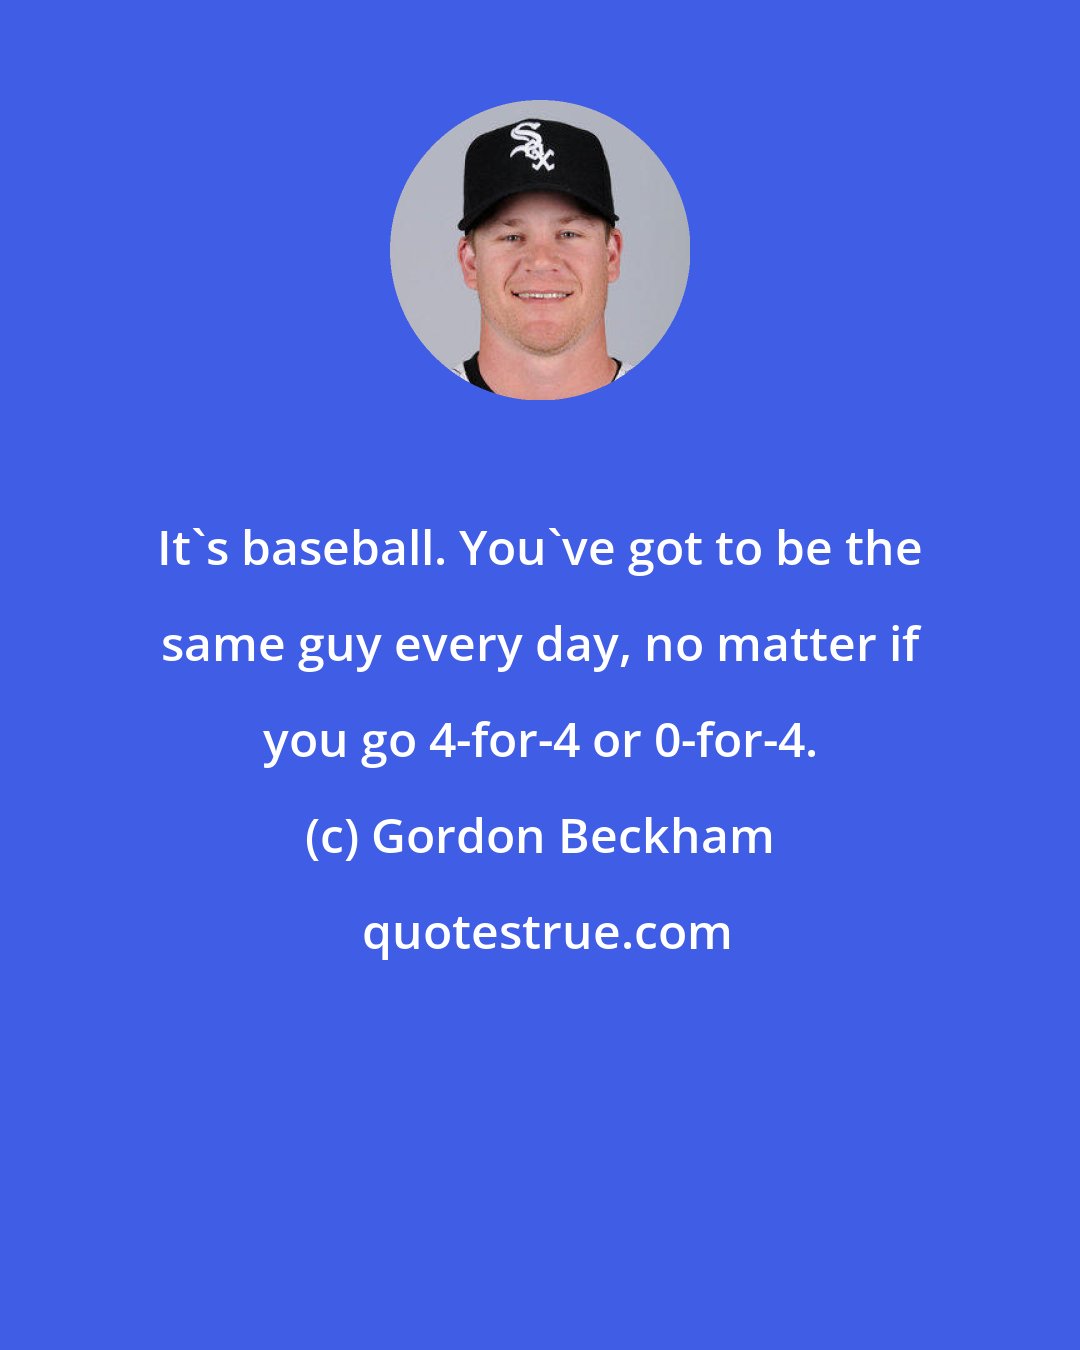 Gordon Beckham: It's baseball. You've got to be the same guy every day, no matter if you go 4-for-4 or 0-for-4.